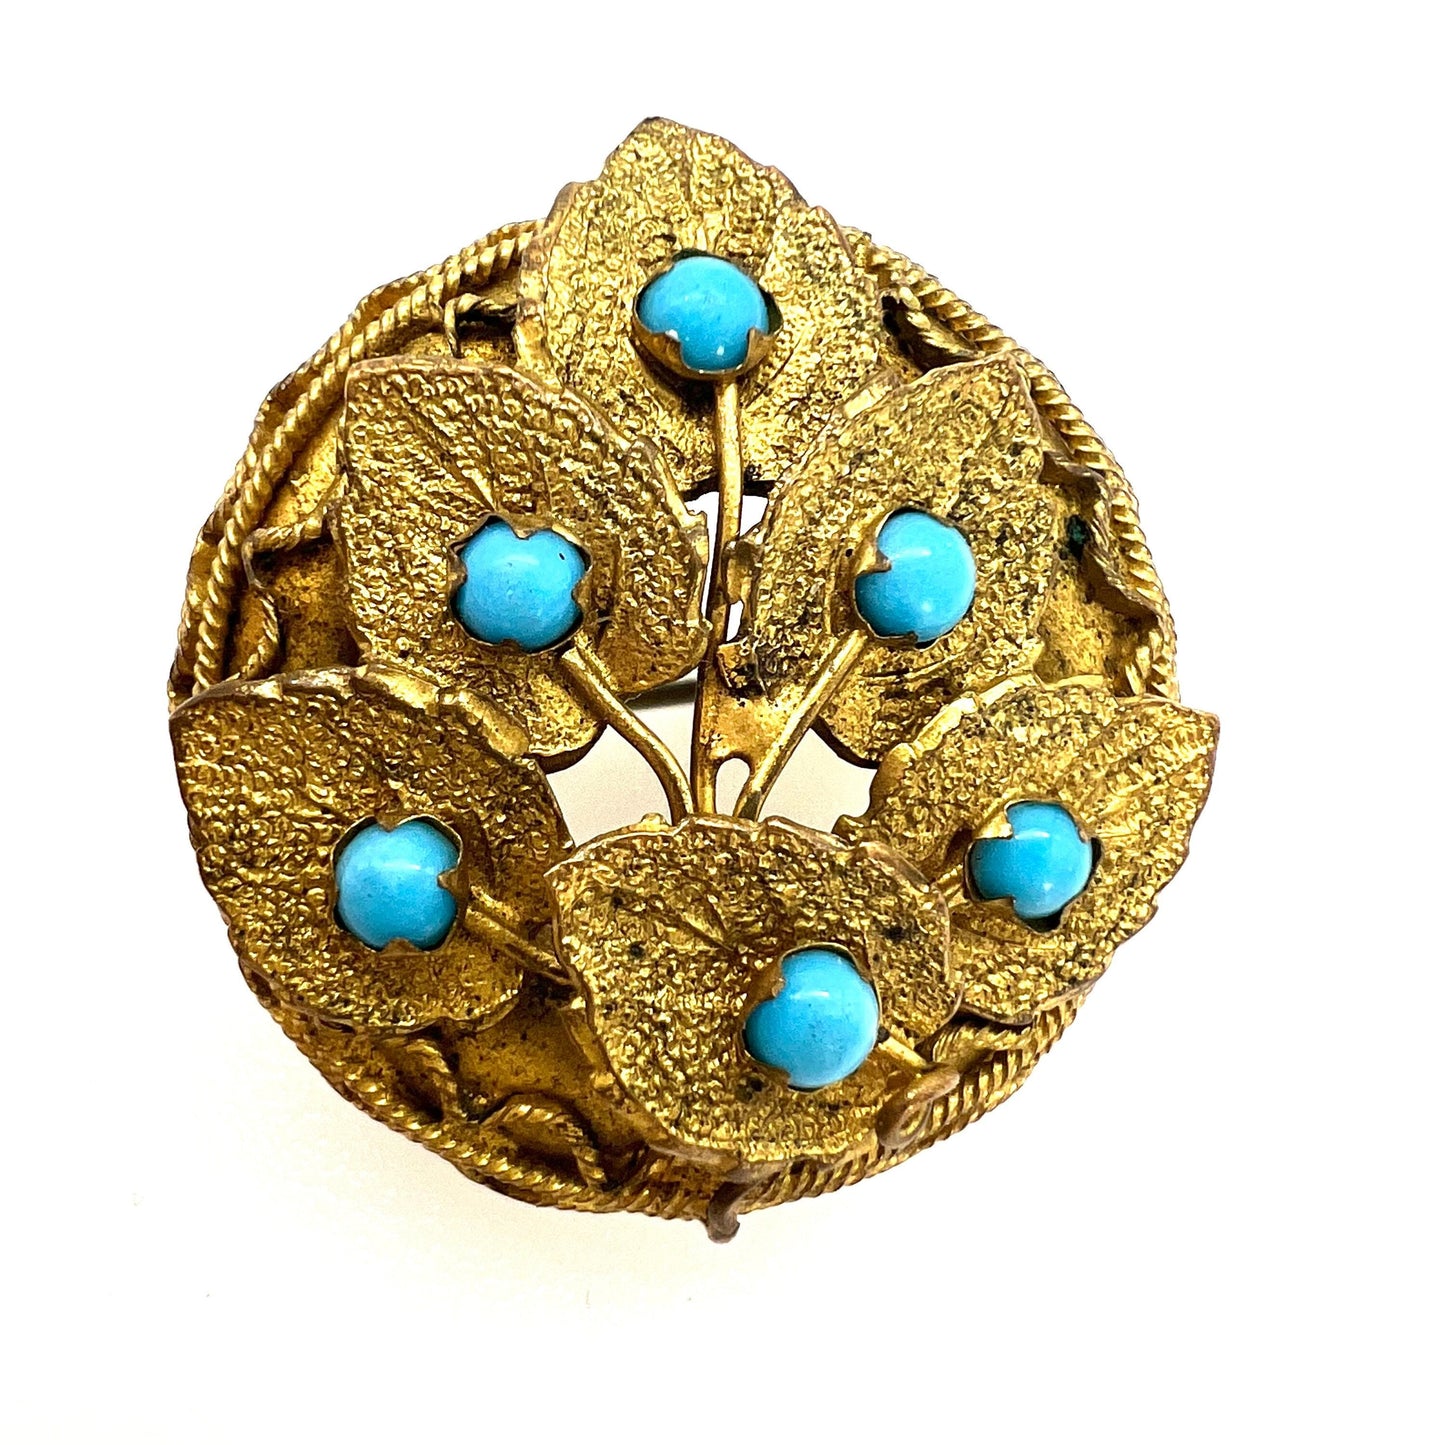 Antique Victorian Etruscan Revival Faux Turquoise and Leaf Gold Tone Brooch